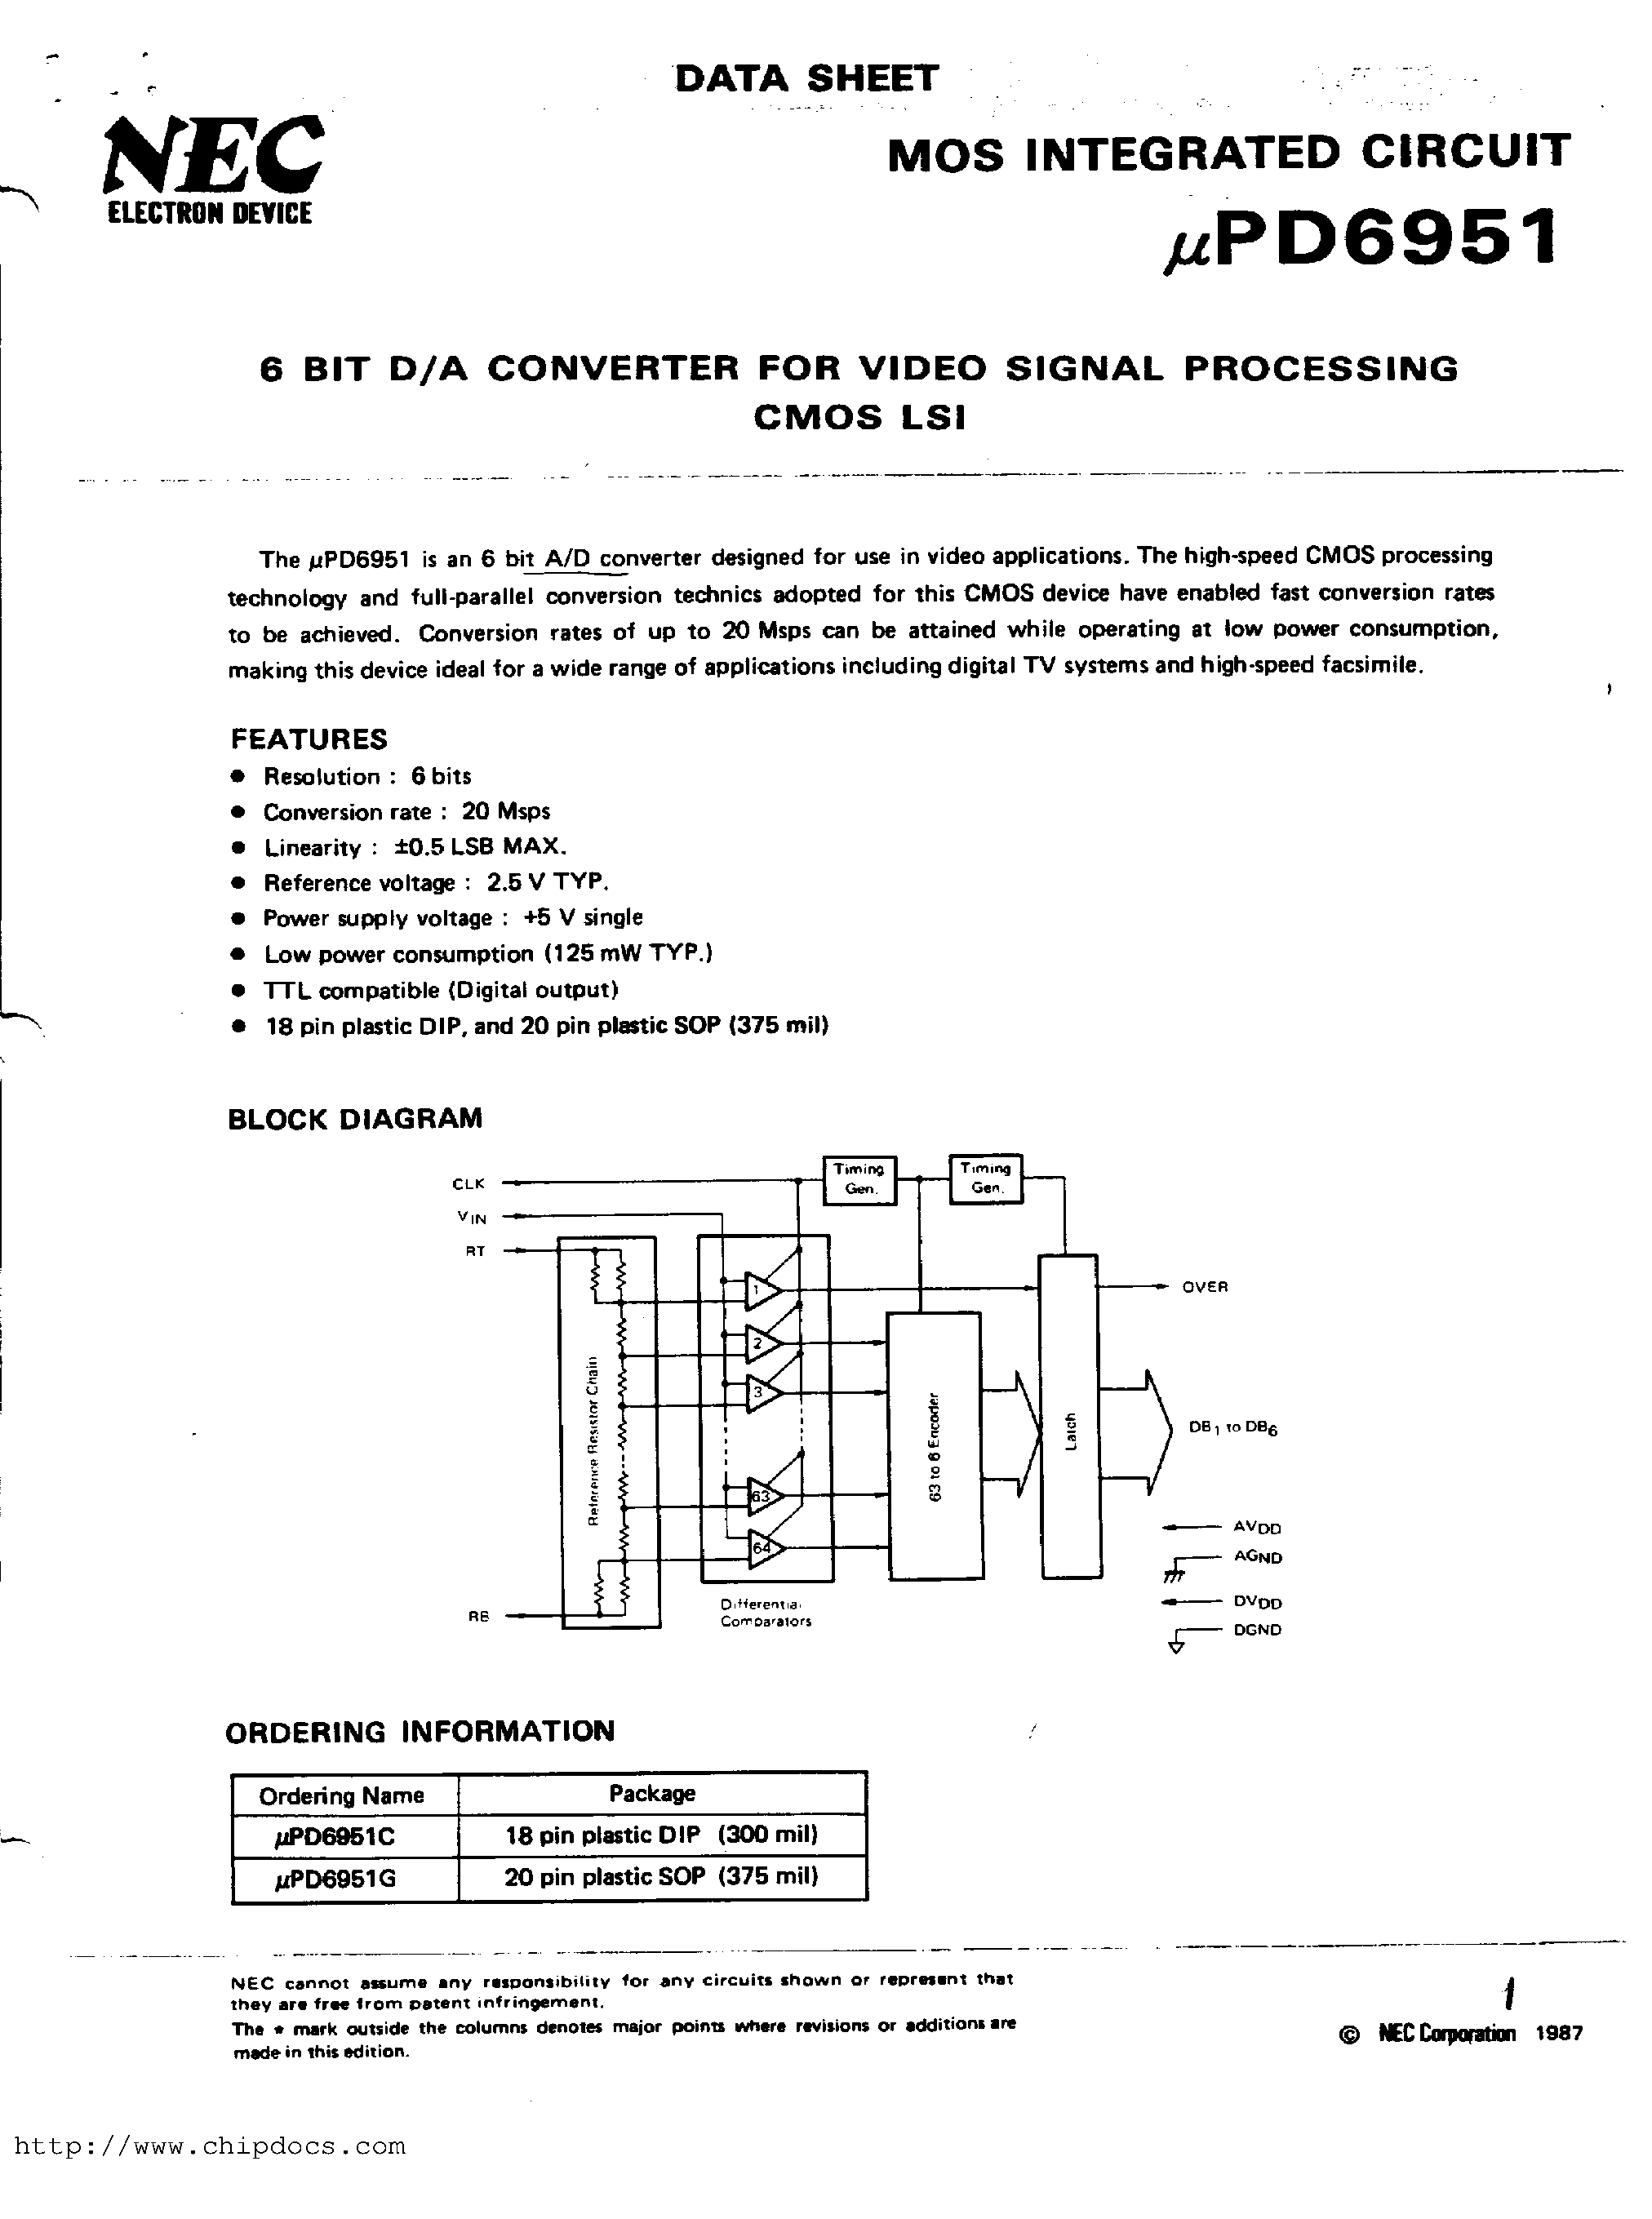 Datasheet UPD6951C - 6 BIT D/A CONVERTER FOR VIDEO SIGNAL PROCESSING CMOS LSI page 1